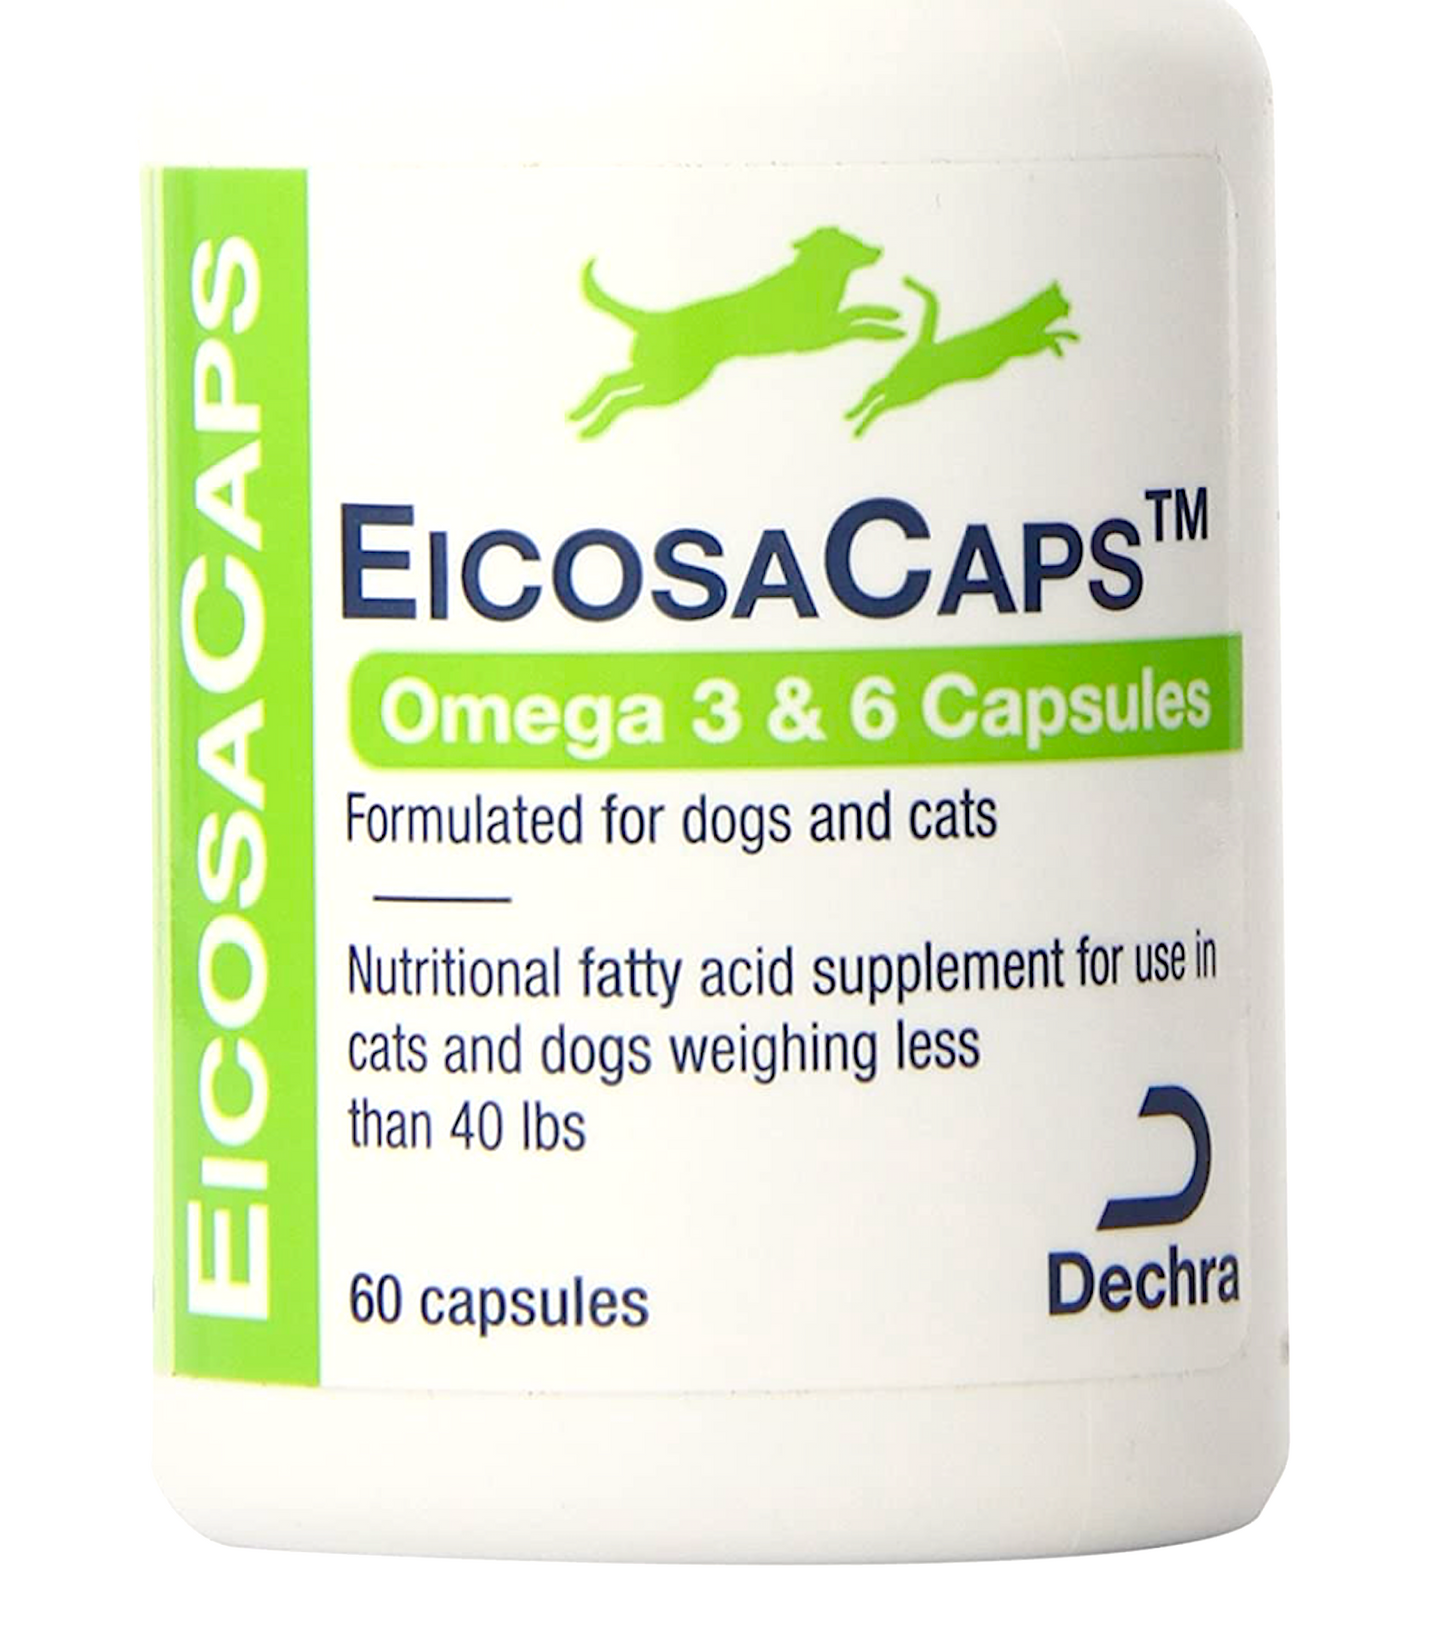 EICOSACAPS: Fish Oil Nutritional Supplement